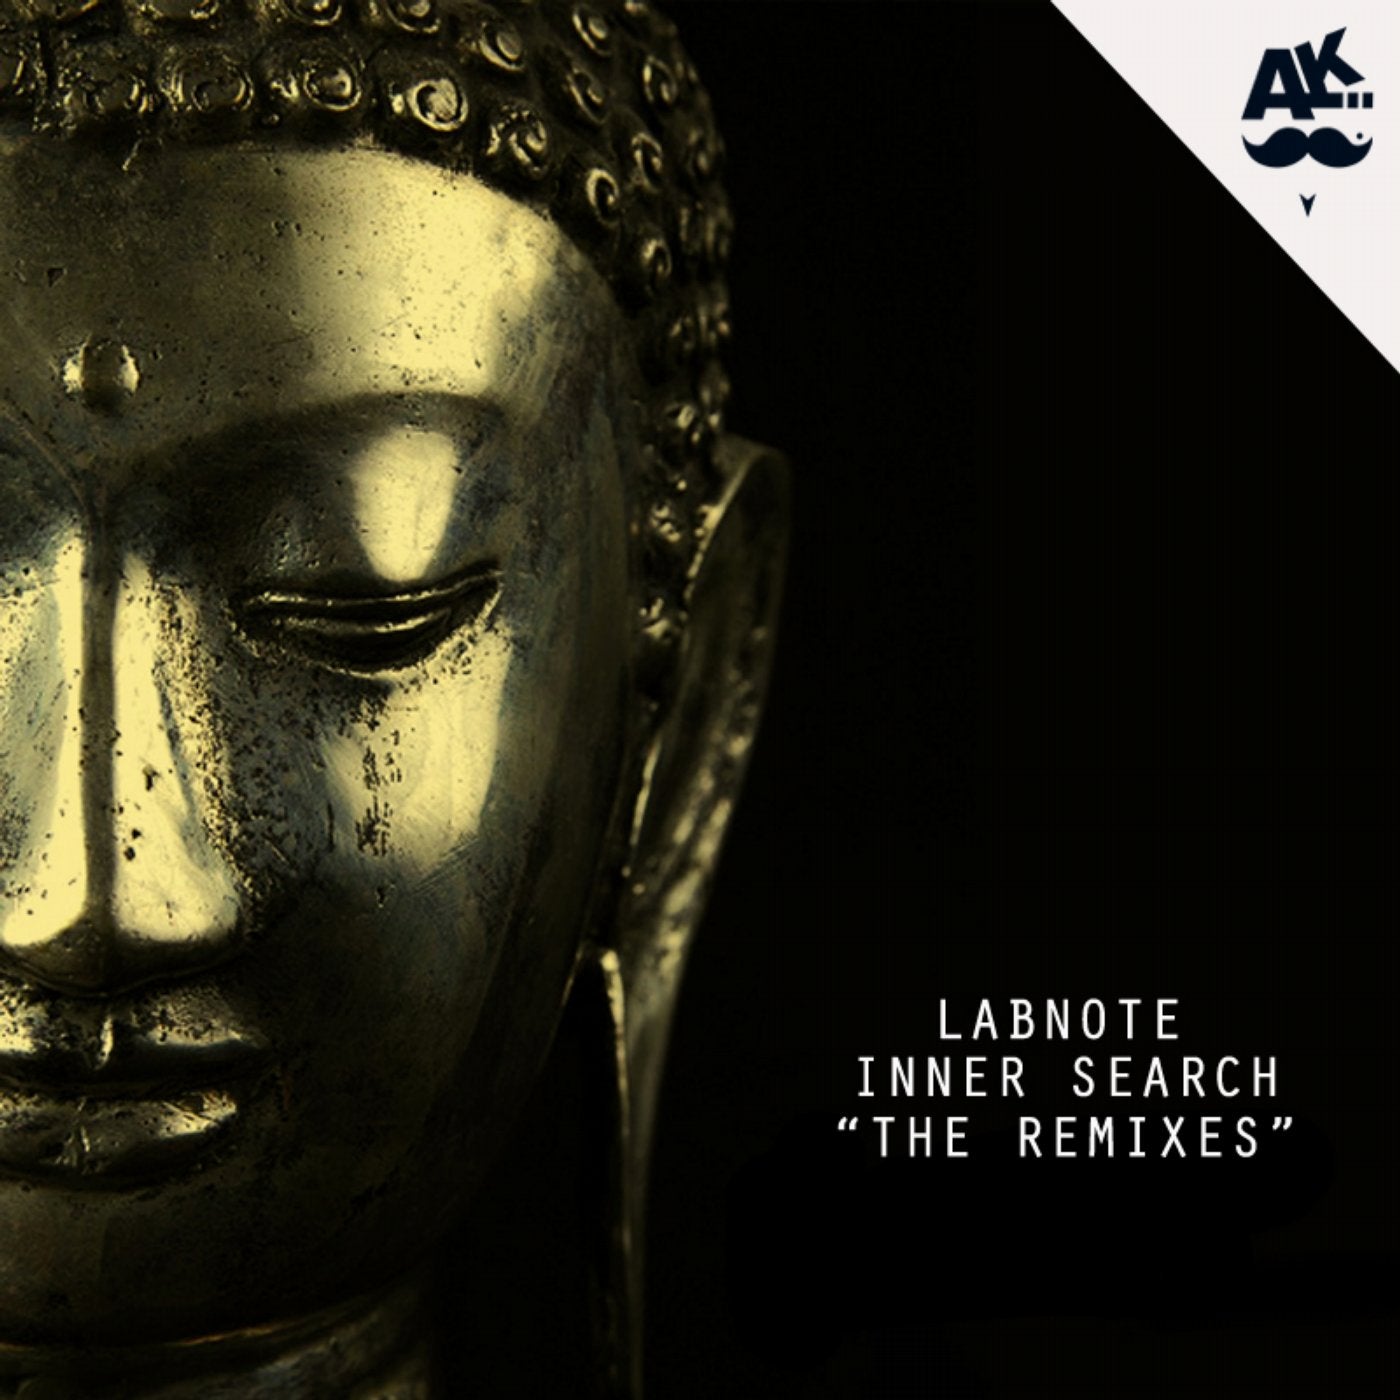 INNER SEARCH "THE REMIXES"